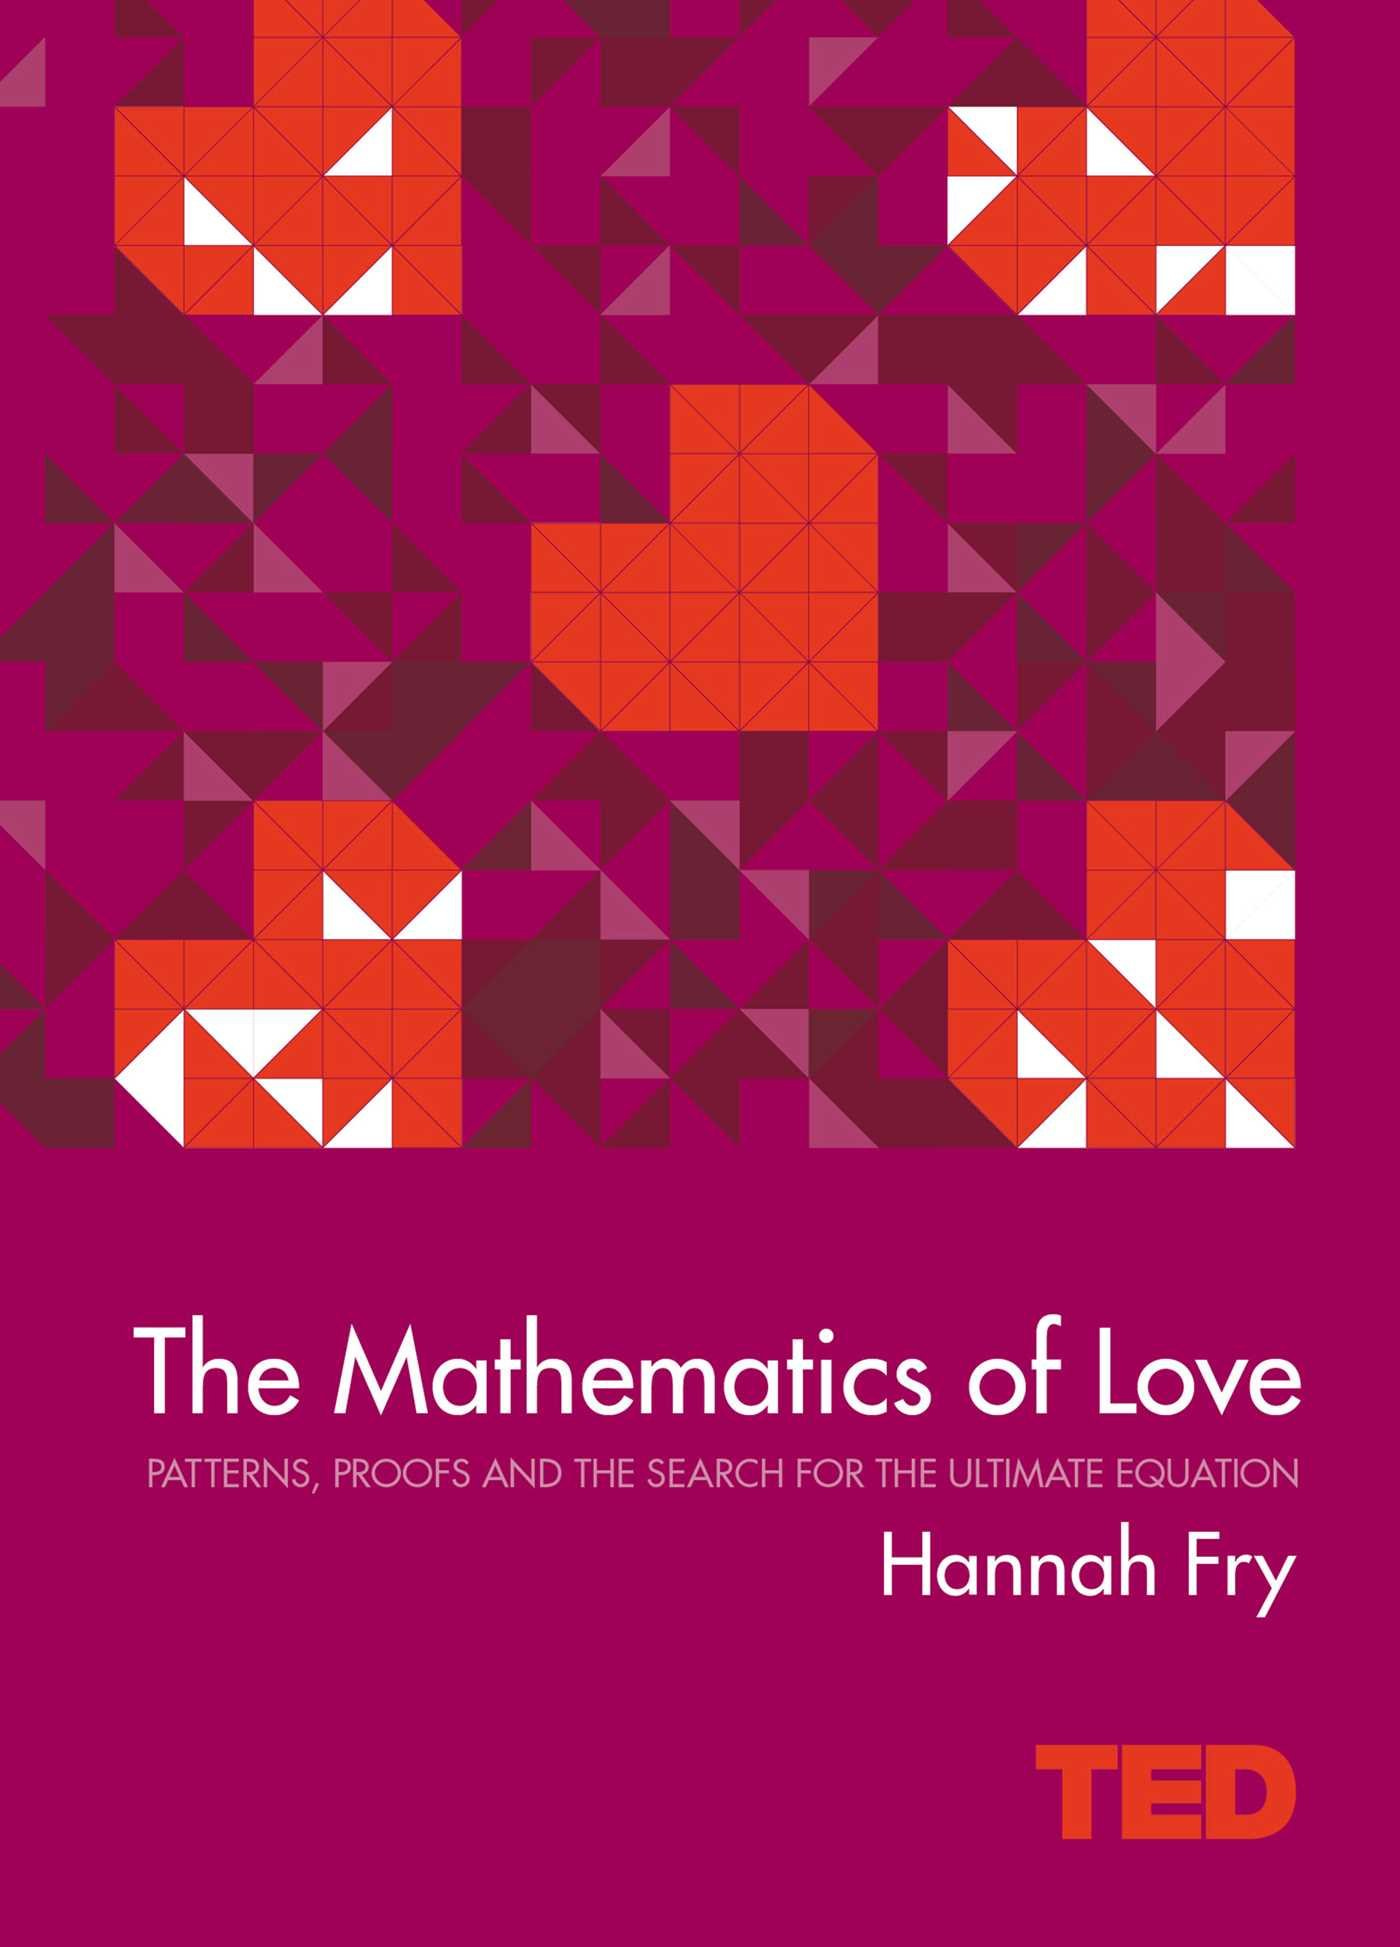 Buy The Mathematics of Love (TED) Book Online at Low Prices in India | The  Mathematics of Love (TED) Reviews & Ratings - Amazon.in